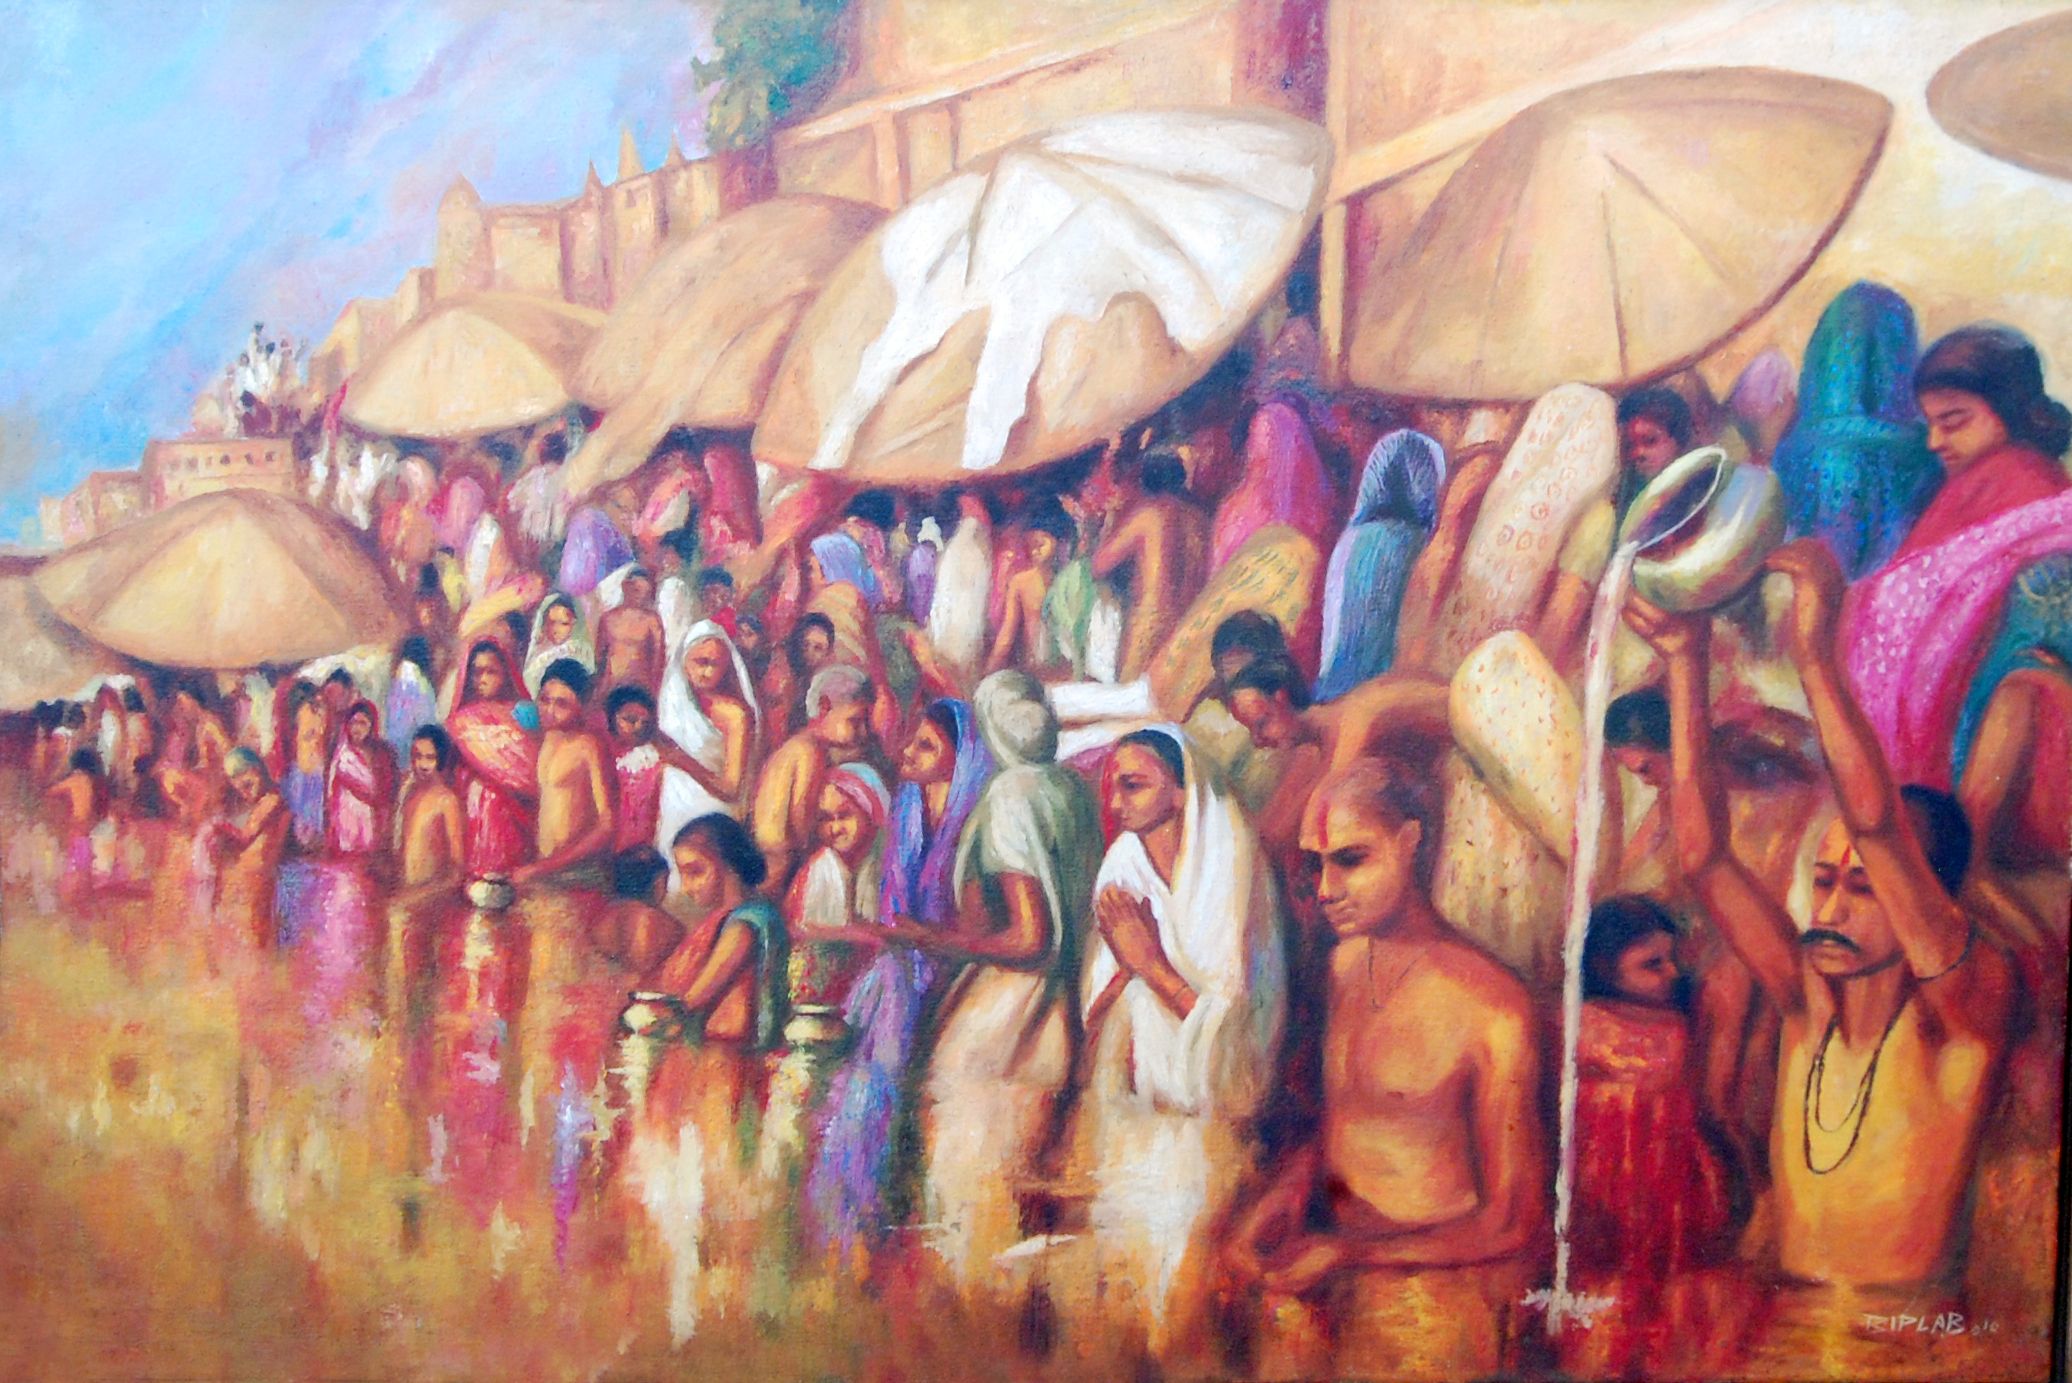 Indian Cultural paintings